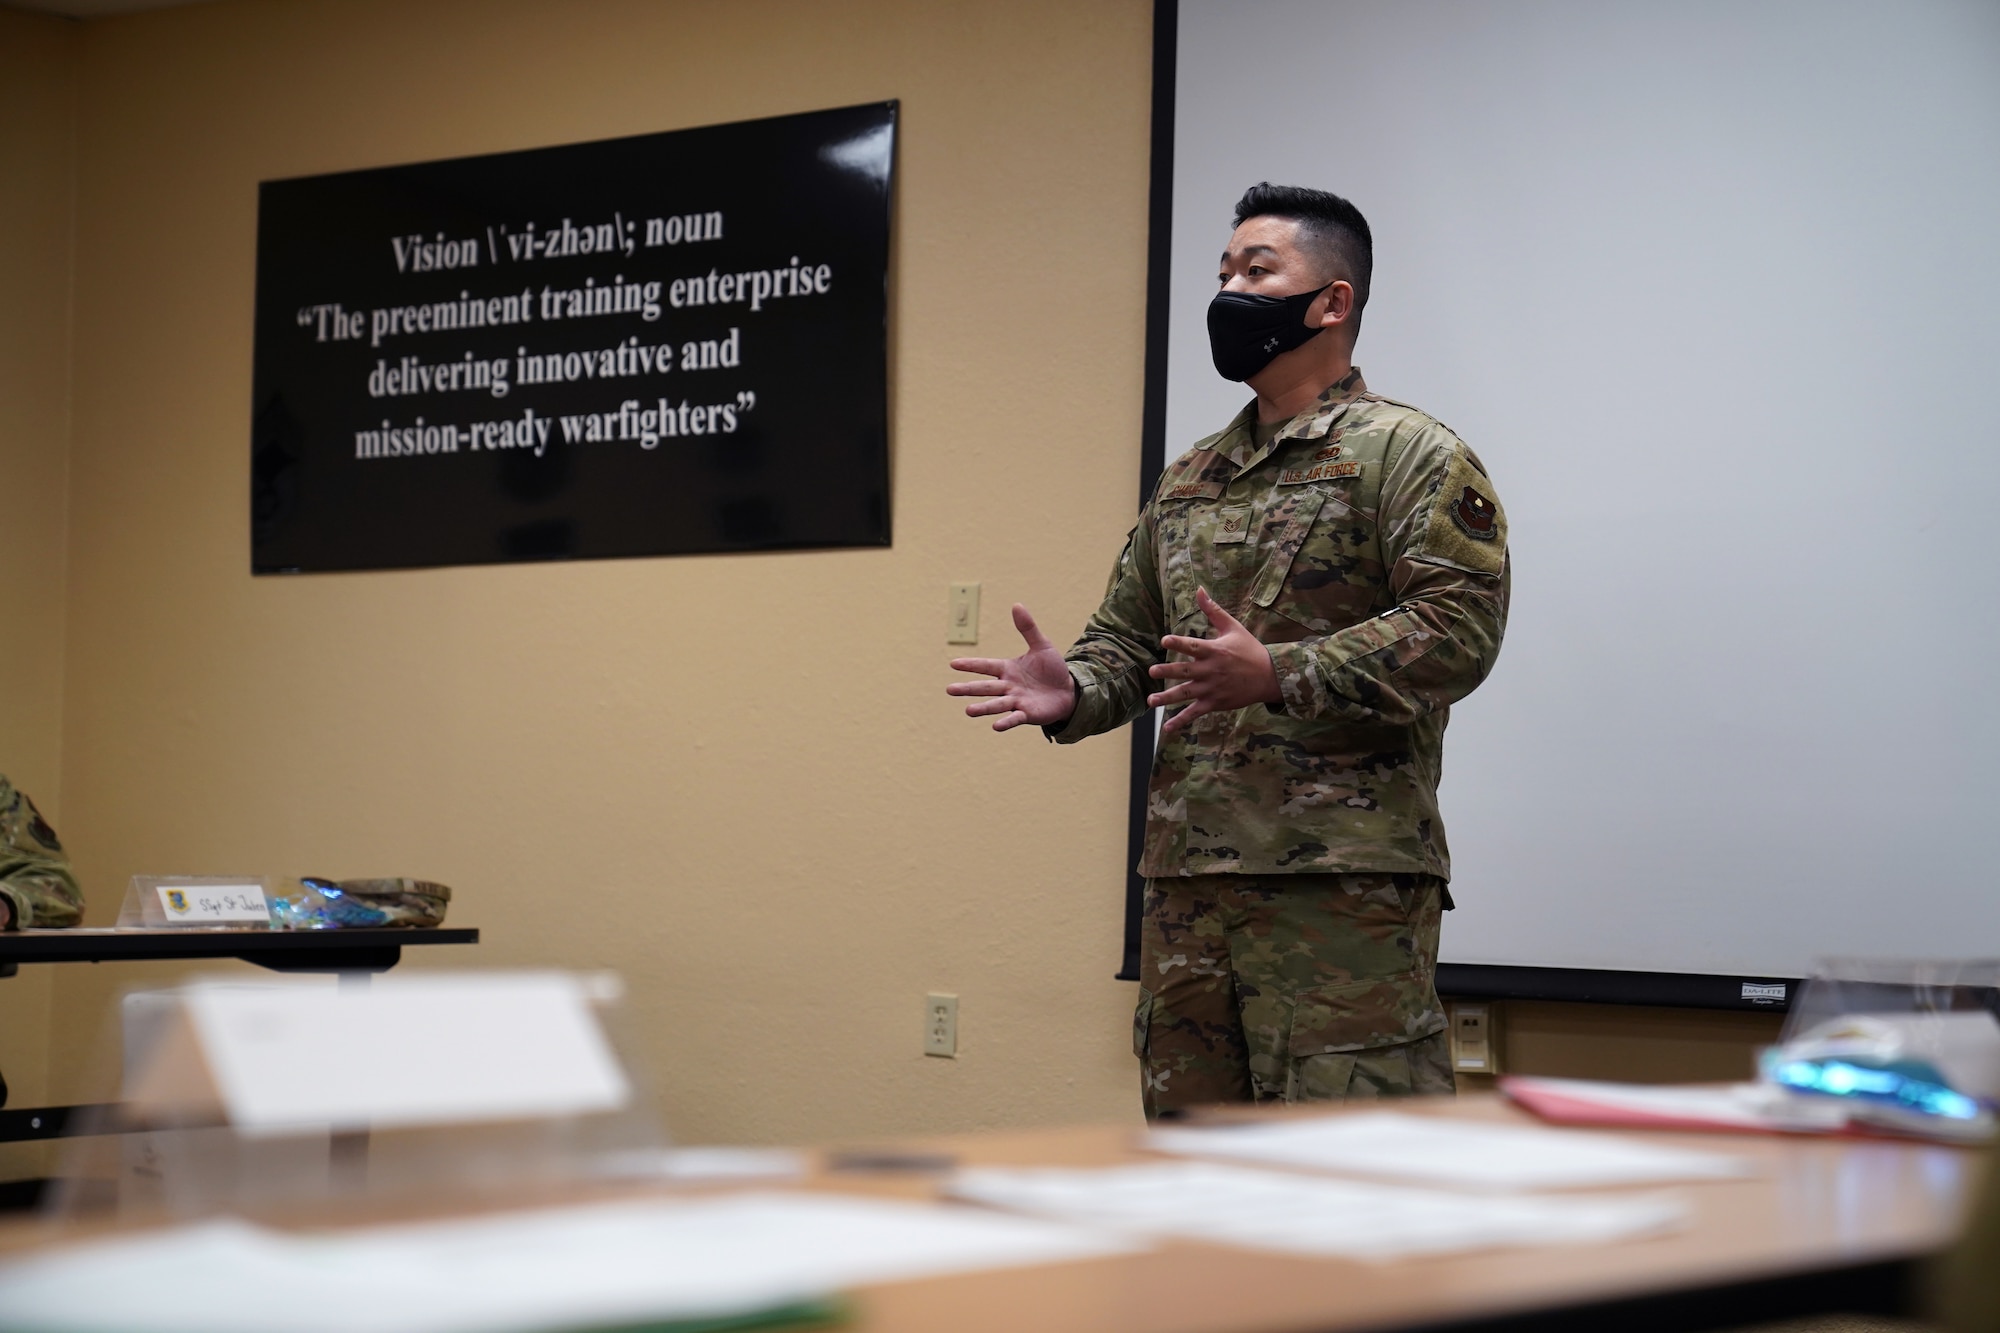 U.S. Air Force Tech. Sgt. Alex Chung, 81st Operational Readiness Medicine Squadron Alcohol and Drug Prevention and Treatment NCO in charge, speaks during a mental health briefing inside the Professional Development Center at Keesler Air Force Base, Mississippi, April 22, 2021. The PDC provides personal and professional development opportunities for service members. (U.S. Air Force photo by Senior Airman Seth Haddix)